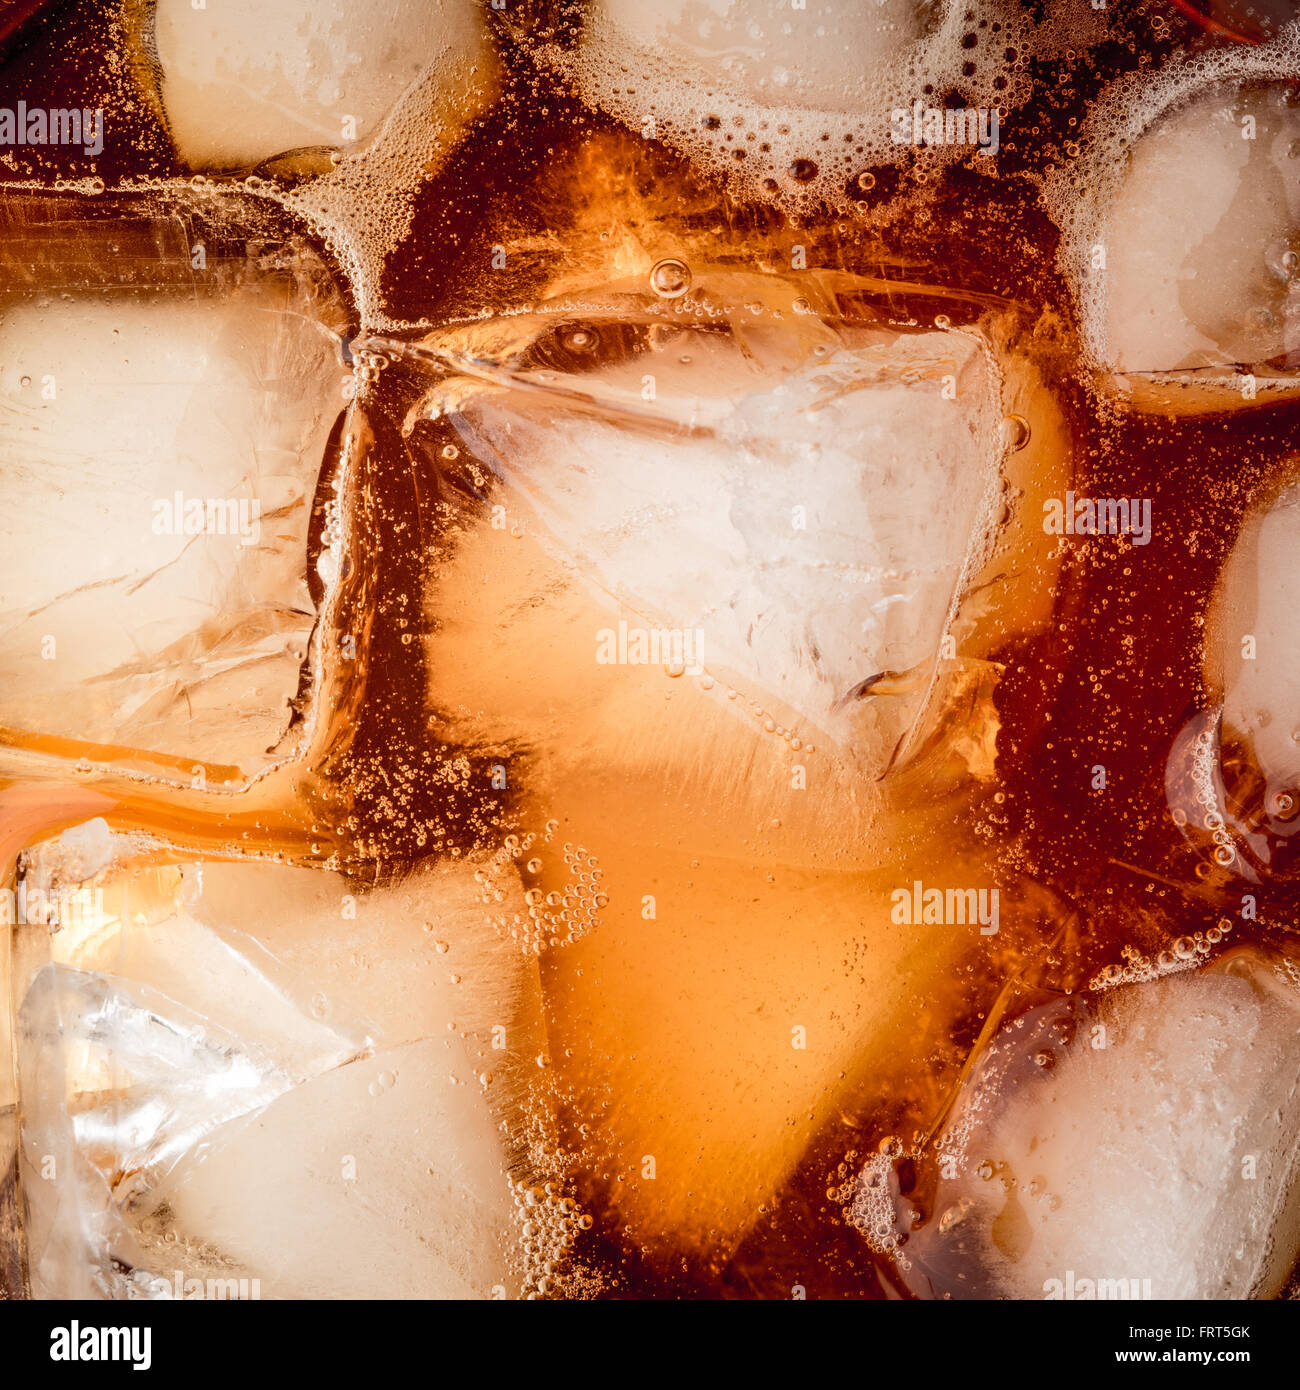 Rum with ice background square Stock Photo